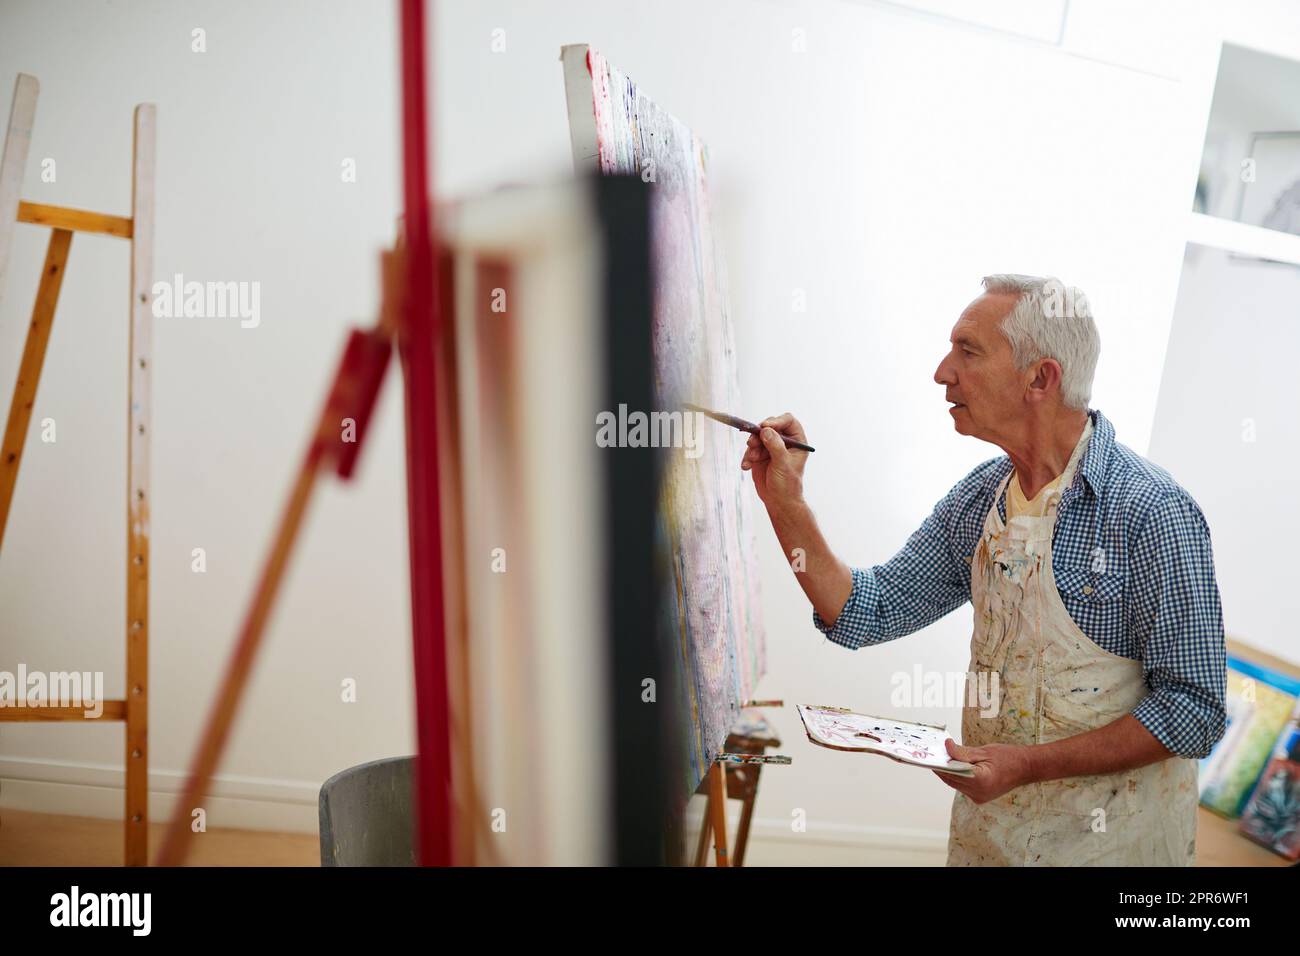 Art is the proper taste of life. Shot of a senior man working on a painting at home. Stock Photo